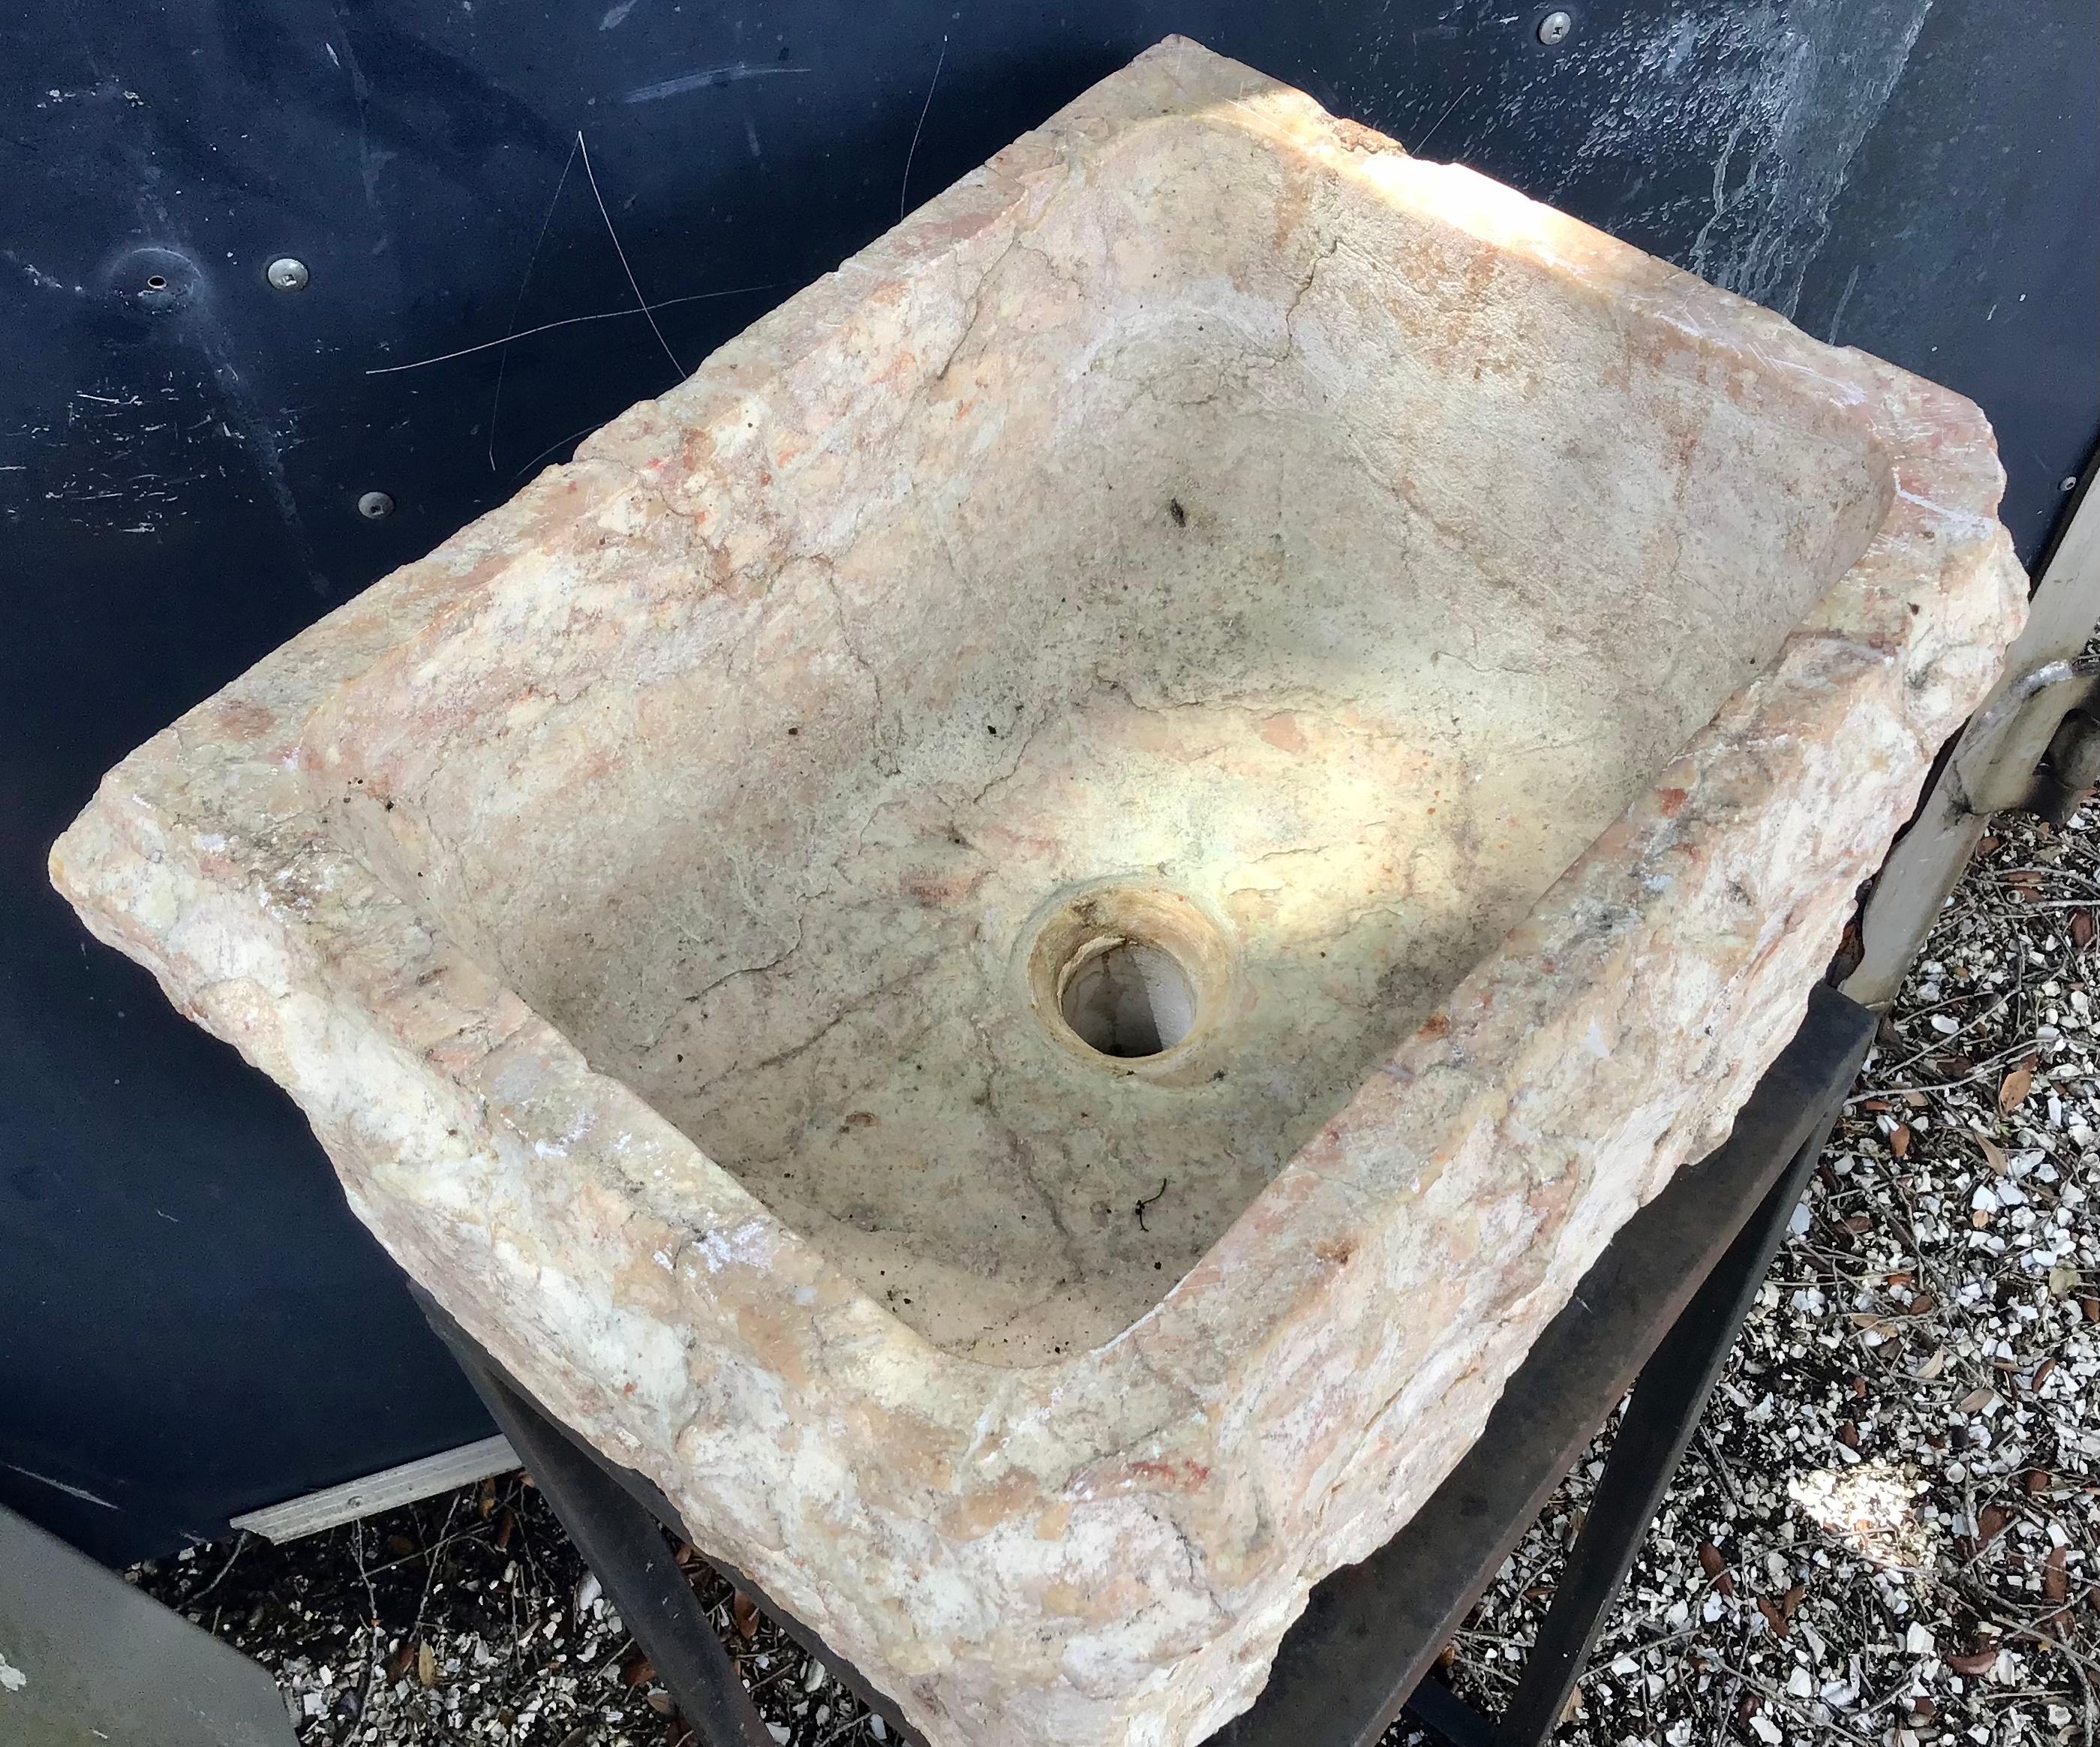 This antique 18th century marble basin is hand carved out one piece of stone. It's ideal for water plants, succulents, orchids or sculptural birdbath. It has been drilled for a drainage hole and can also be used as a unique bathroom sink or water